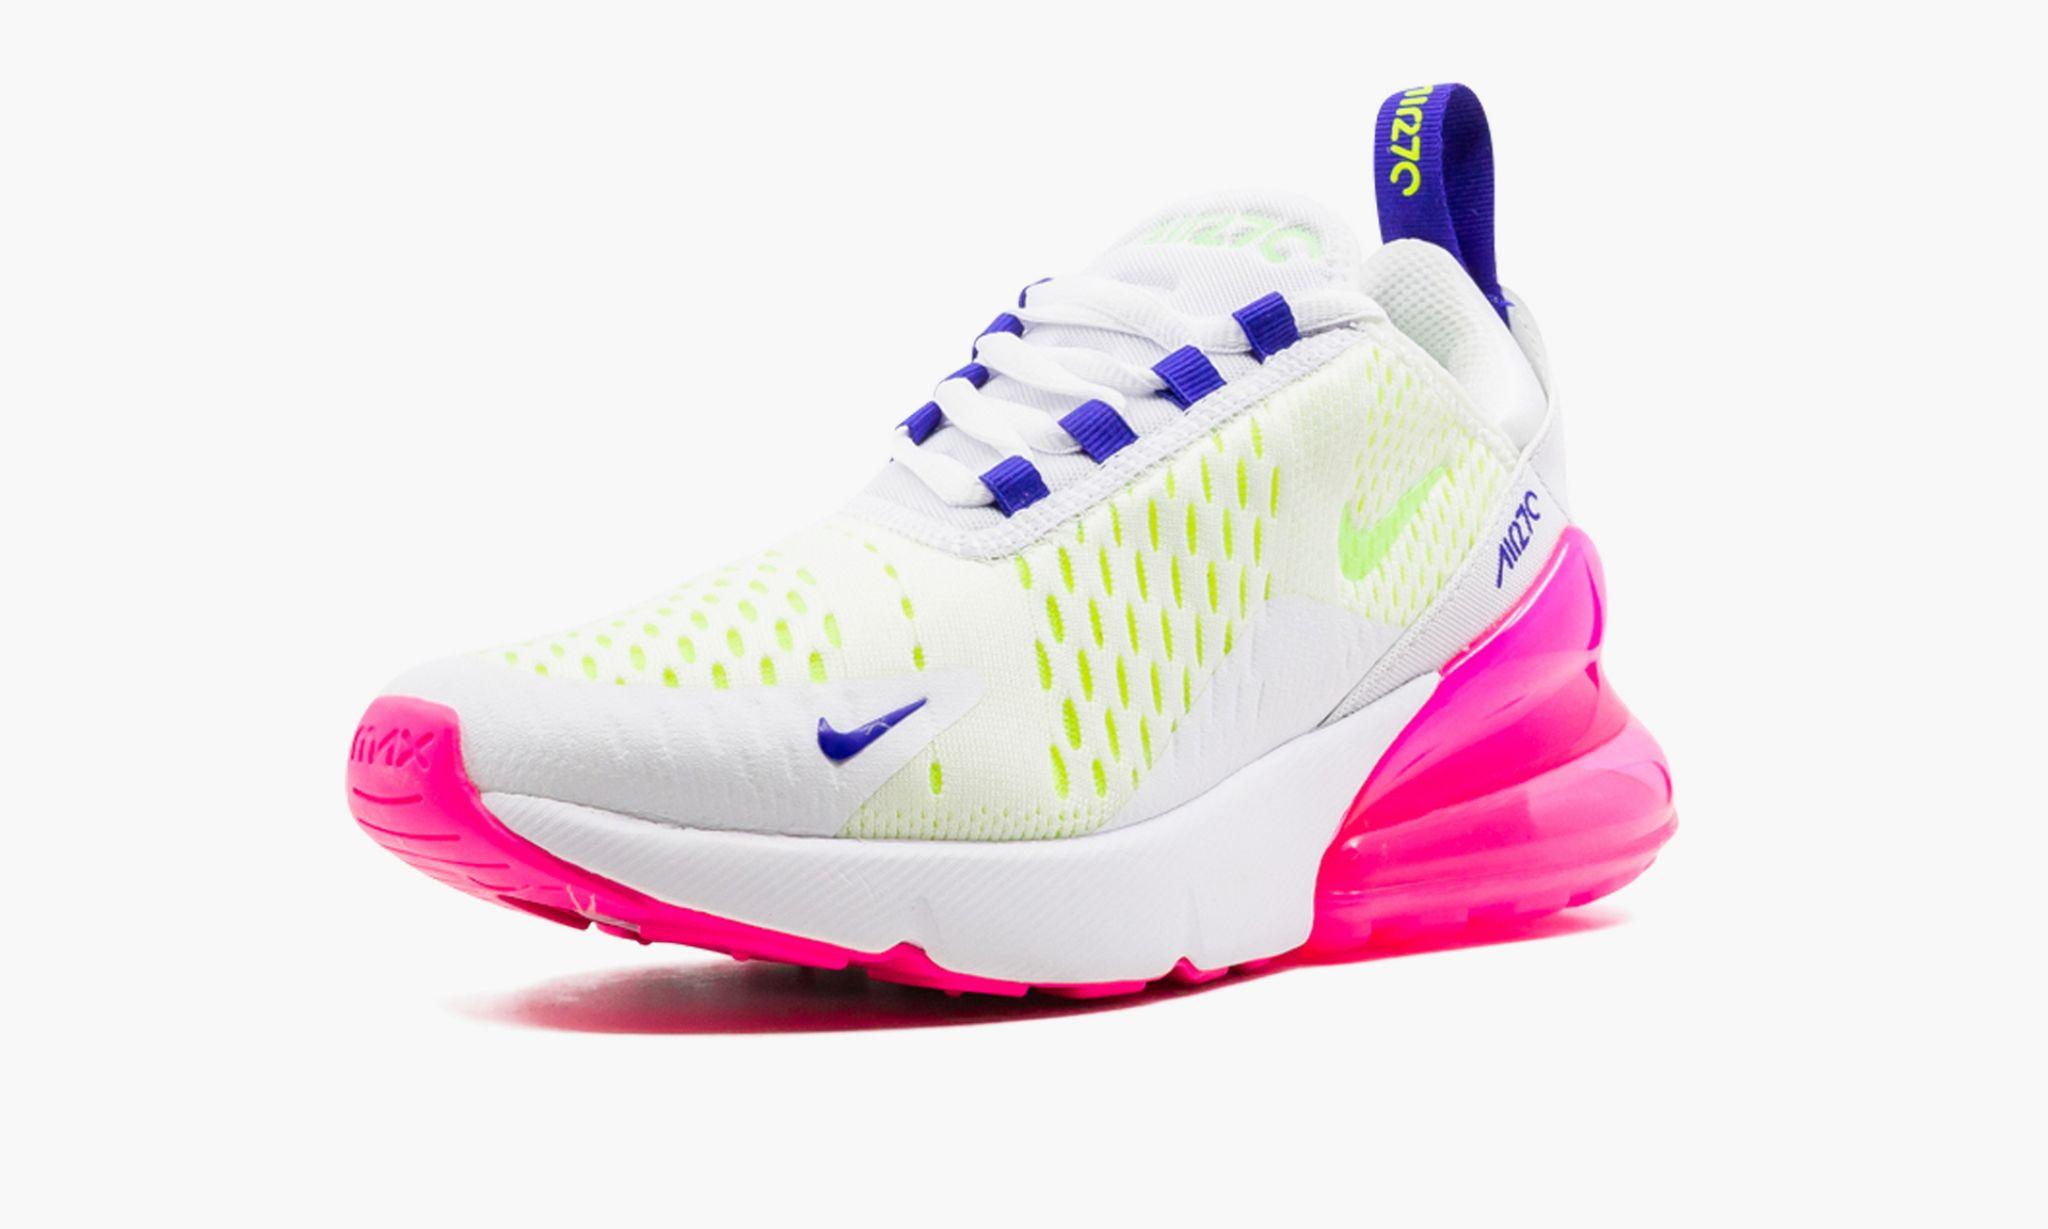 Nike Rubber Air Max 270 "white / Pink Blast / Volt" Shoes | Lyst